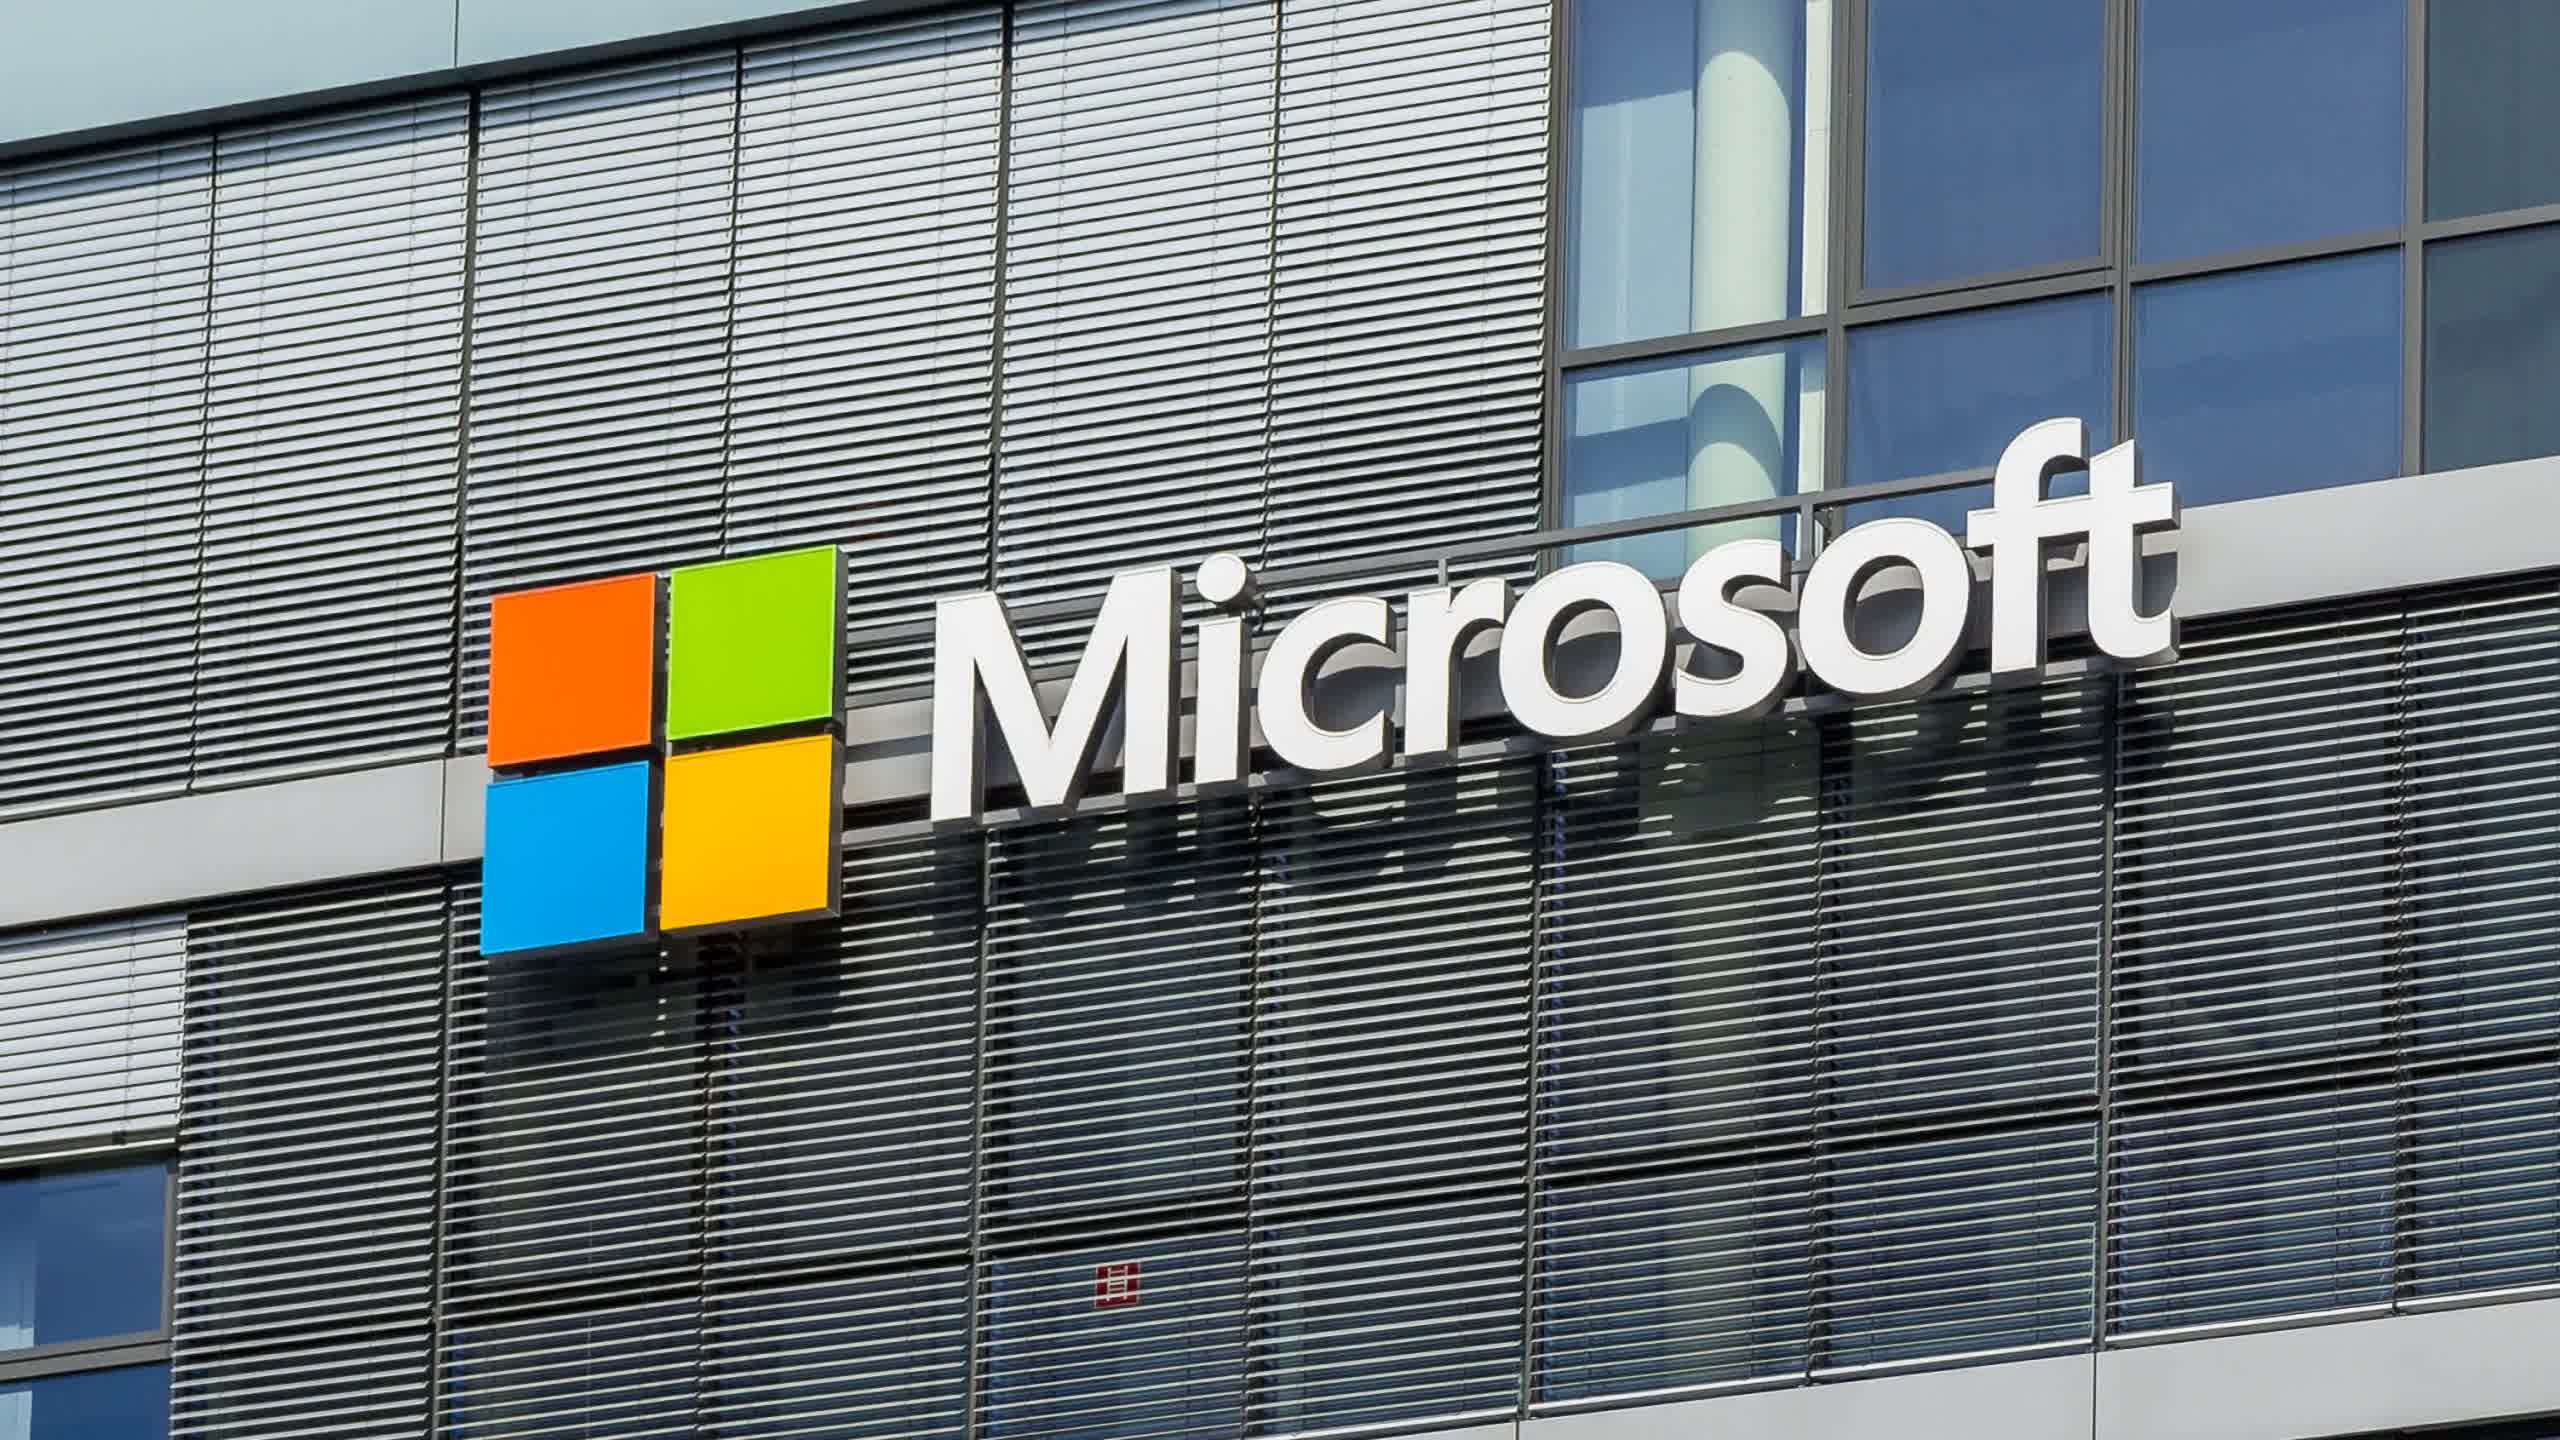 Microsoft-Activision acquisition faces another hurdle thanks to UK regulatory probe